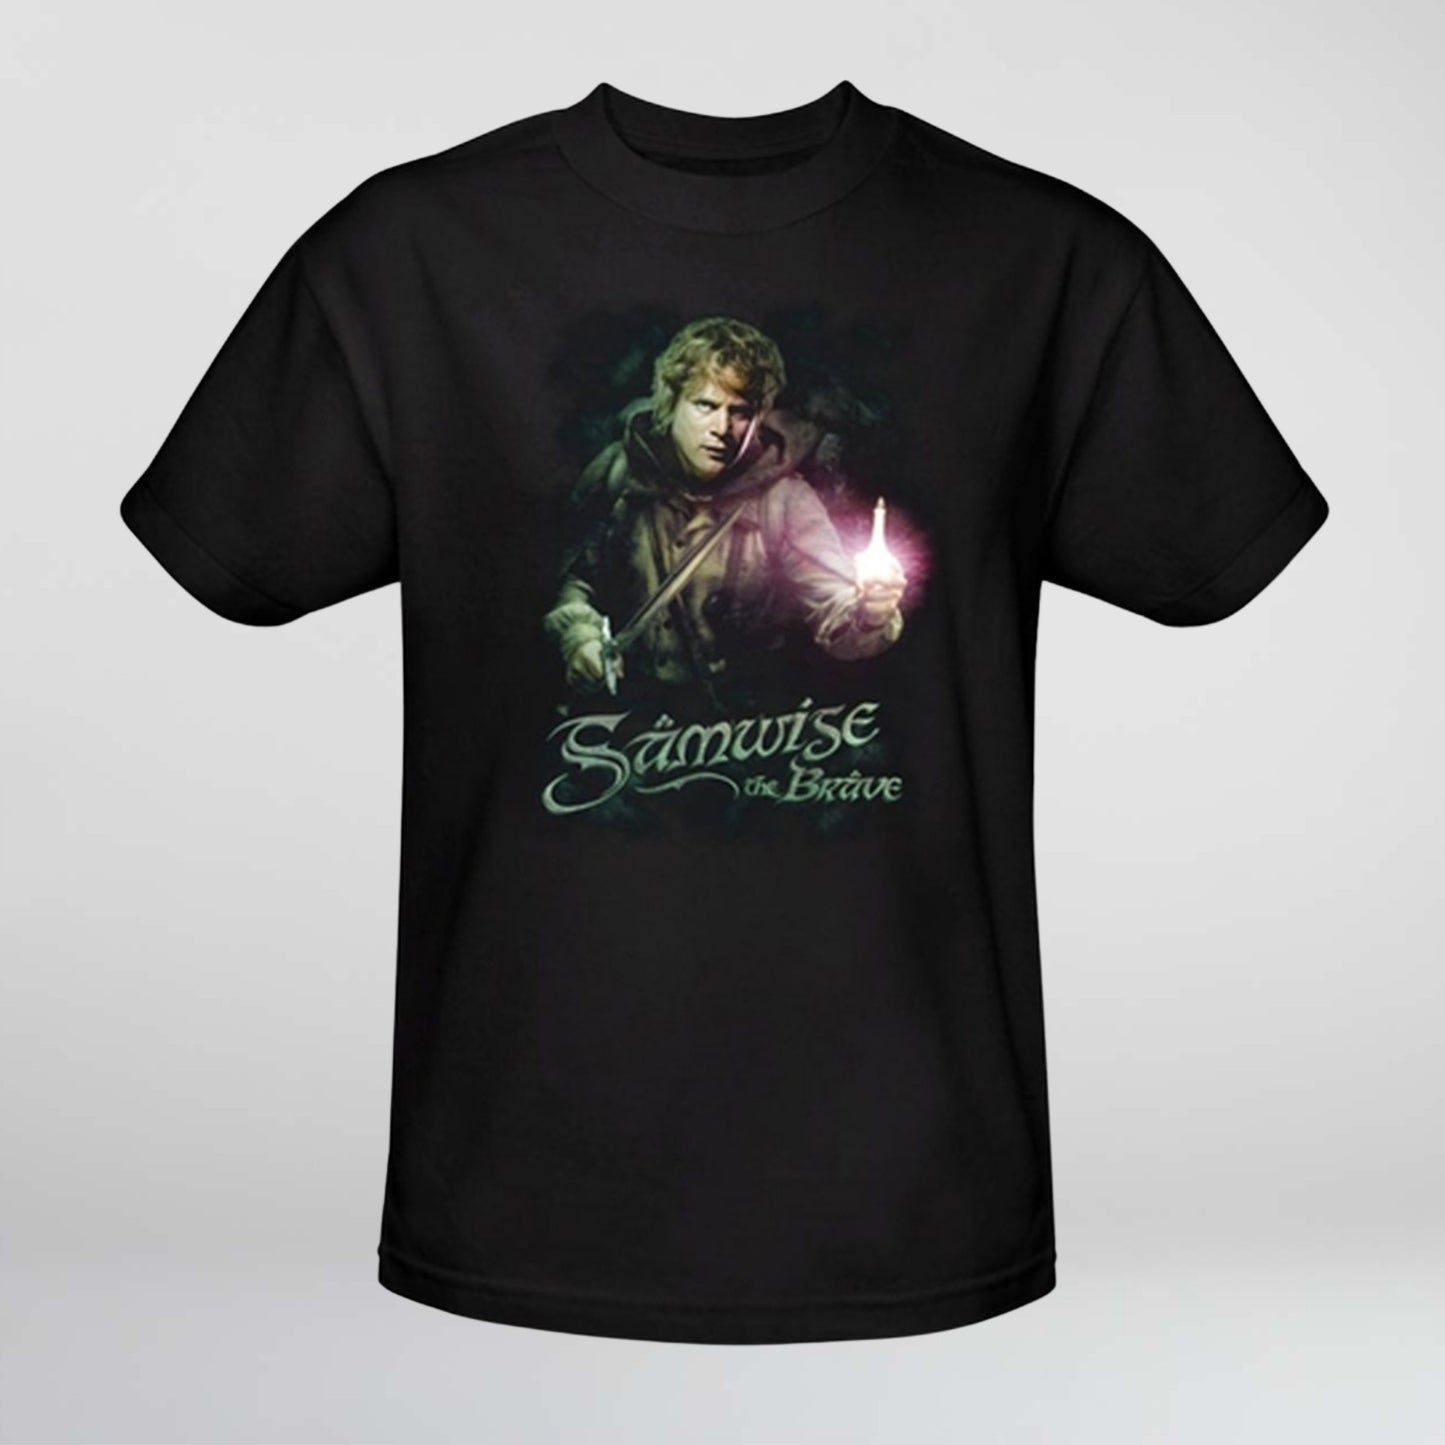 Samwise The Brave (The Lord of the Rings) Unisex Black Shirt